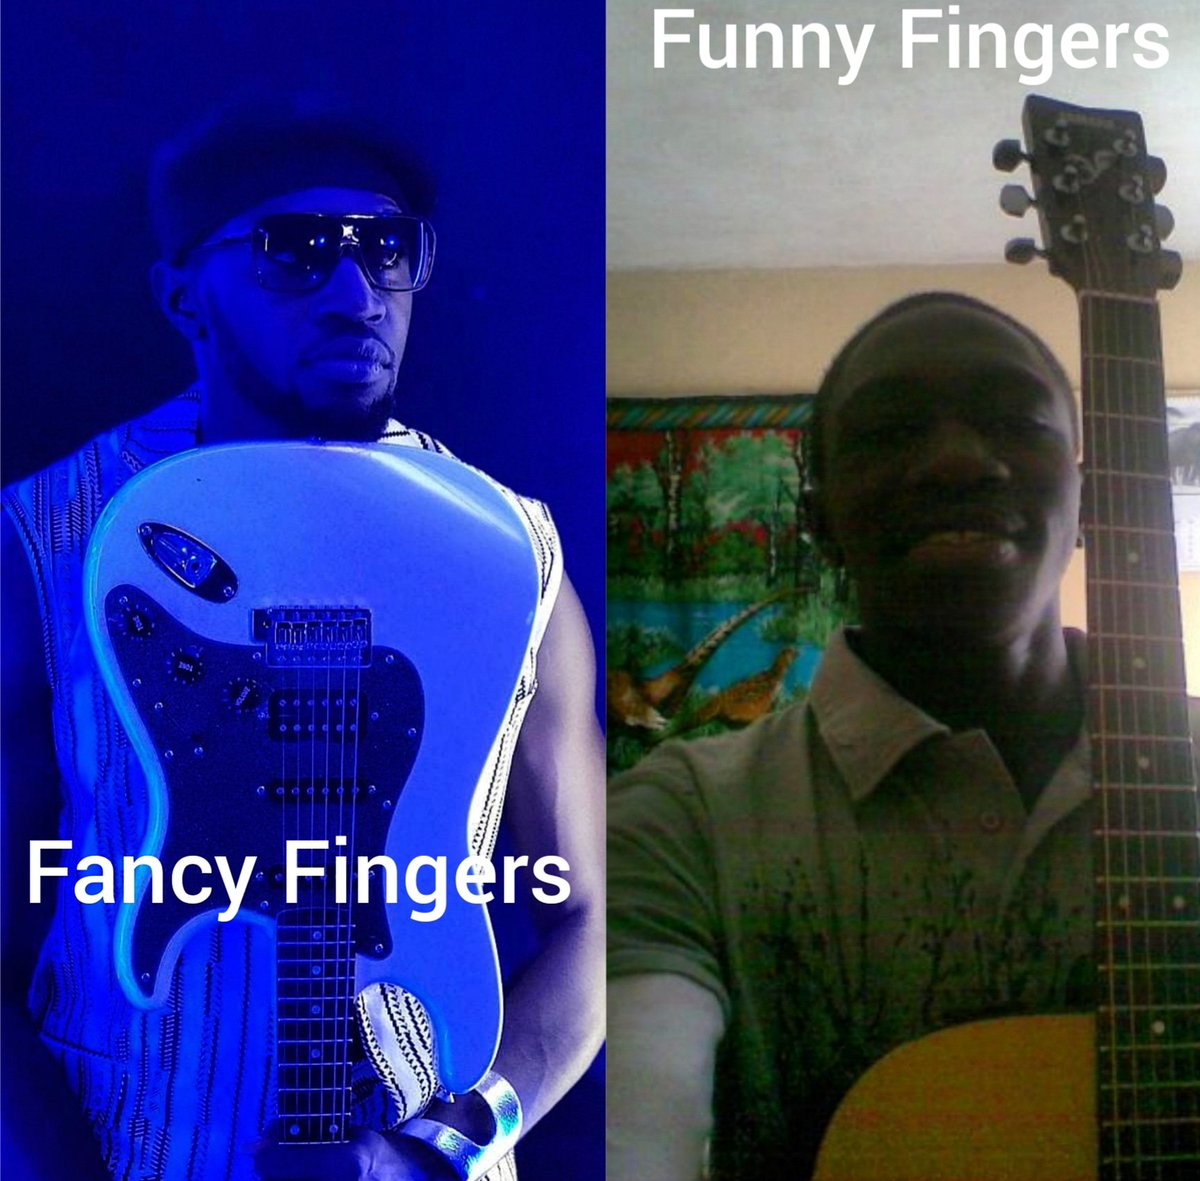 A quick question to the ladies. Who would you rather give out your number to? #FancyFingers  or #FunnyFingers? Can't wait to see the lies 🤣 #RewindSelekta #Rewind